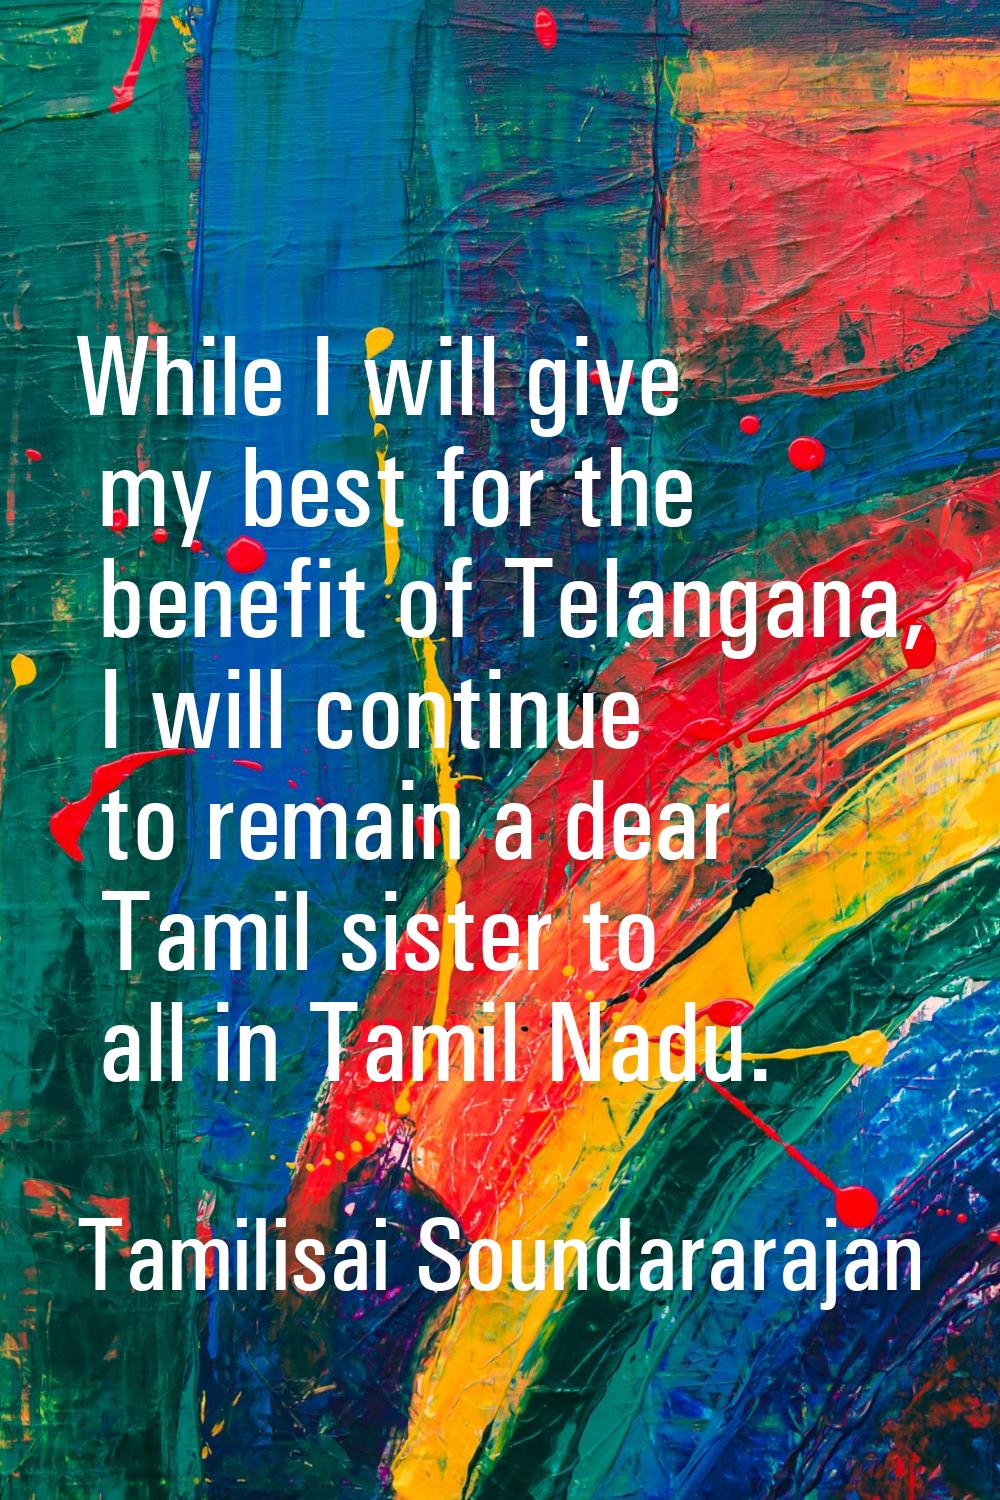 While I will give my best for the benefit of Telangana, I will continue to remain a dear Tamil sist